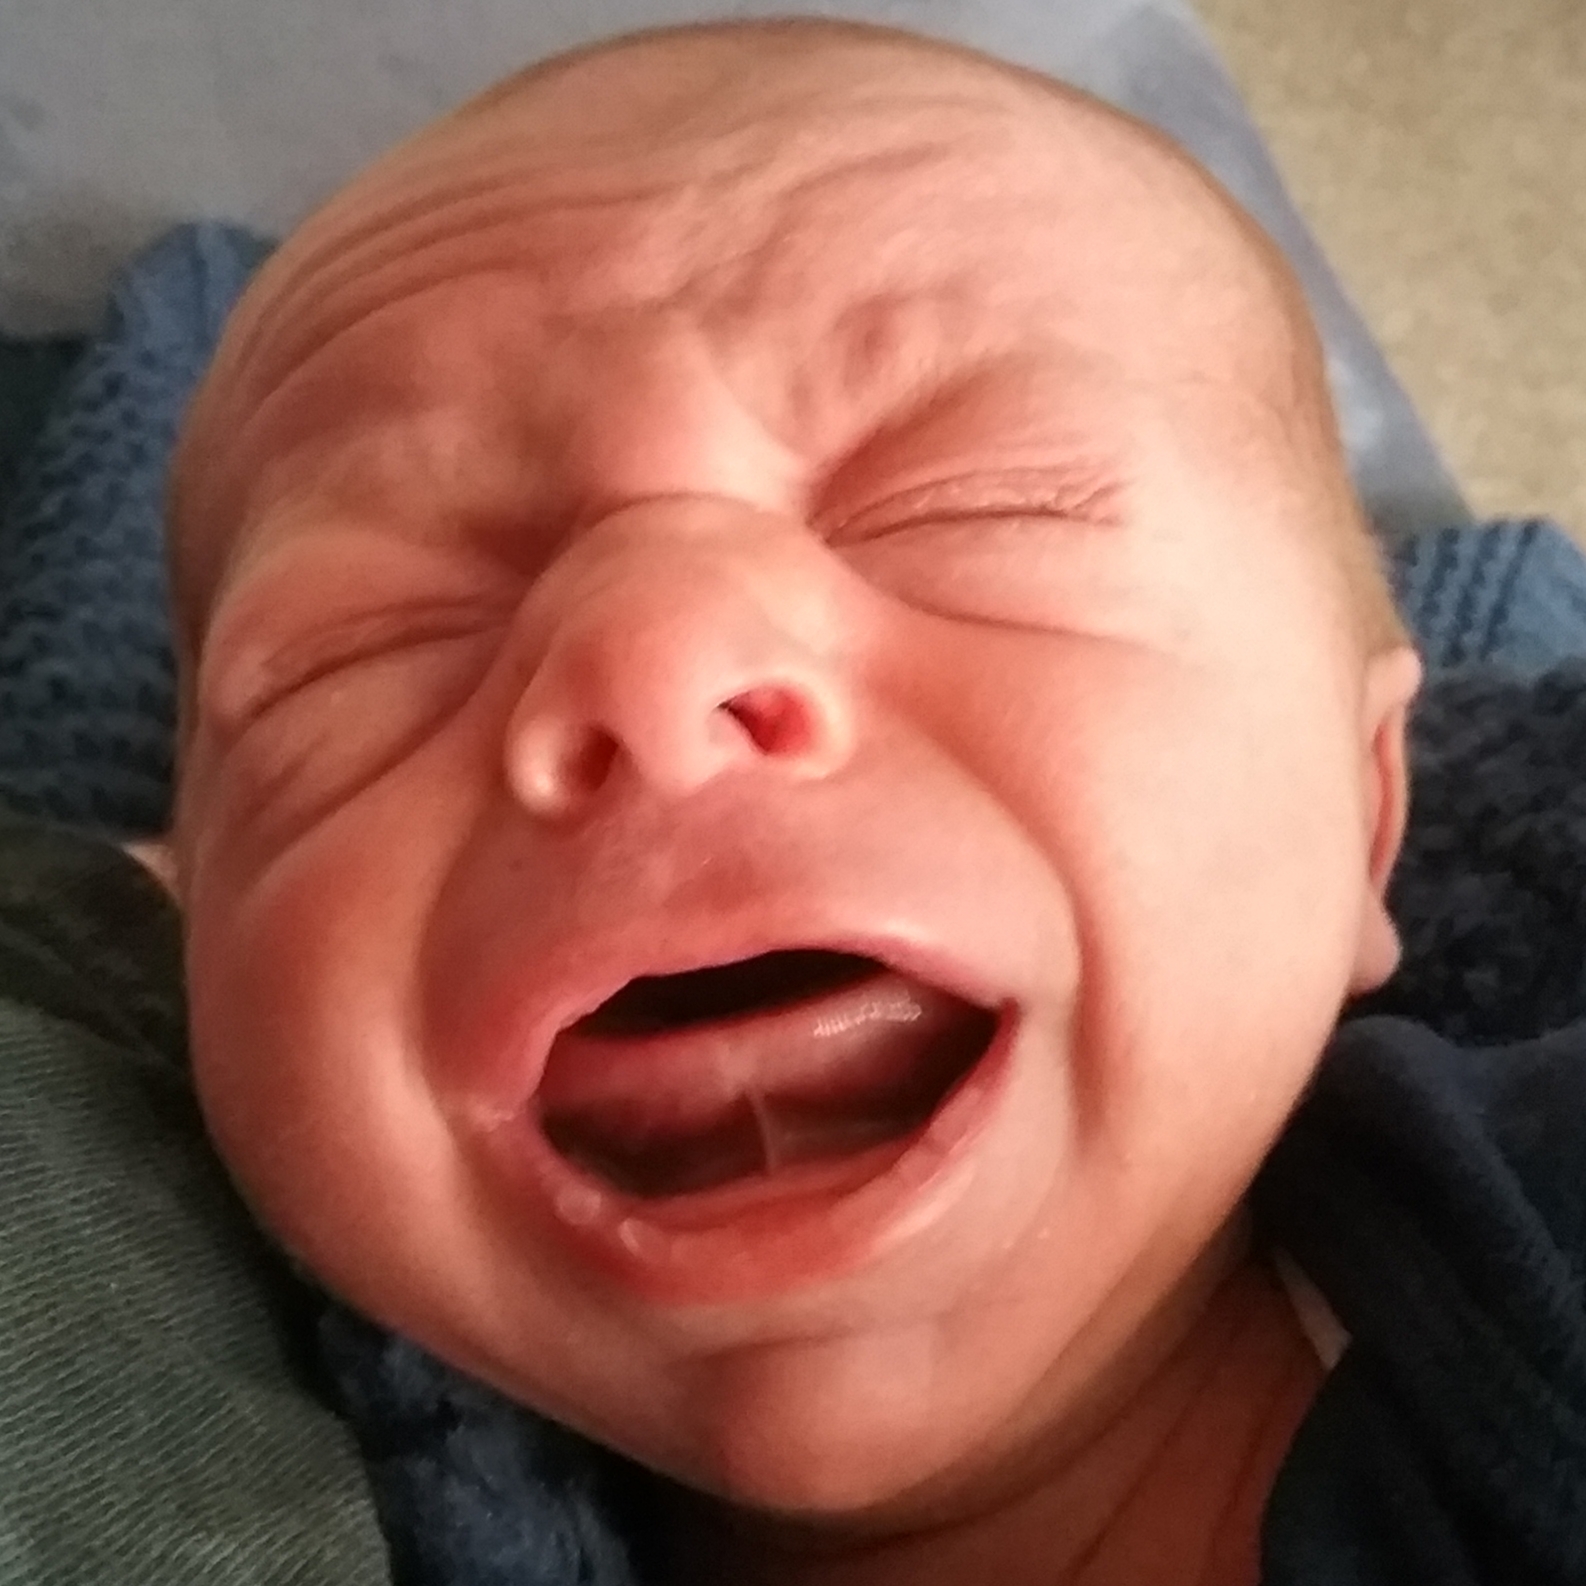 High Quality Crying Colic Baby Blank Meme Template